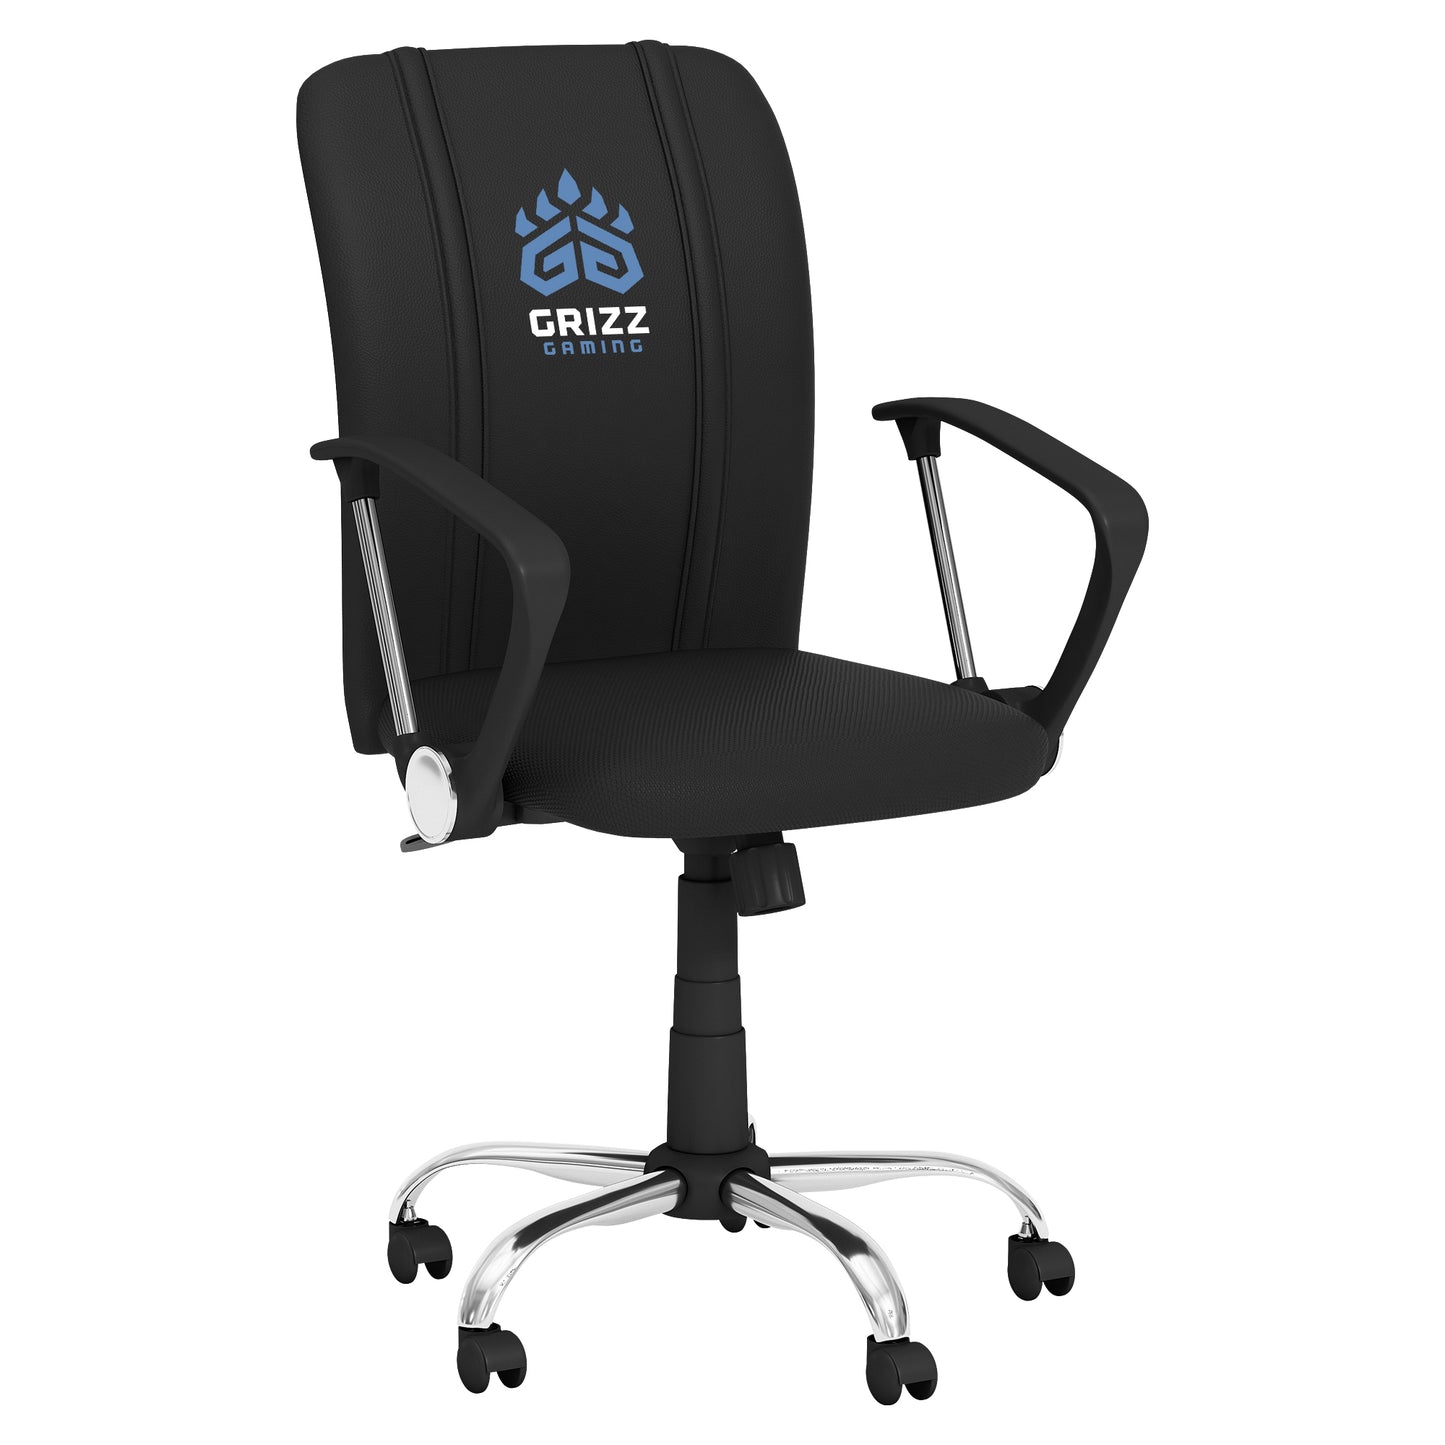 Curve Task Chair with Memphis Grizz Gaming Logo